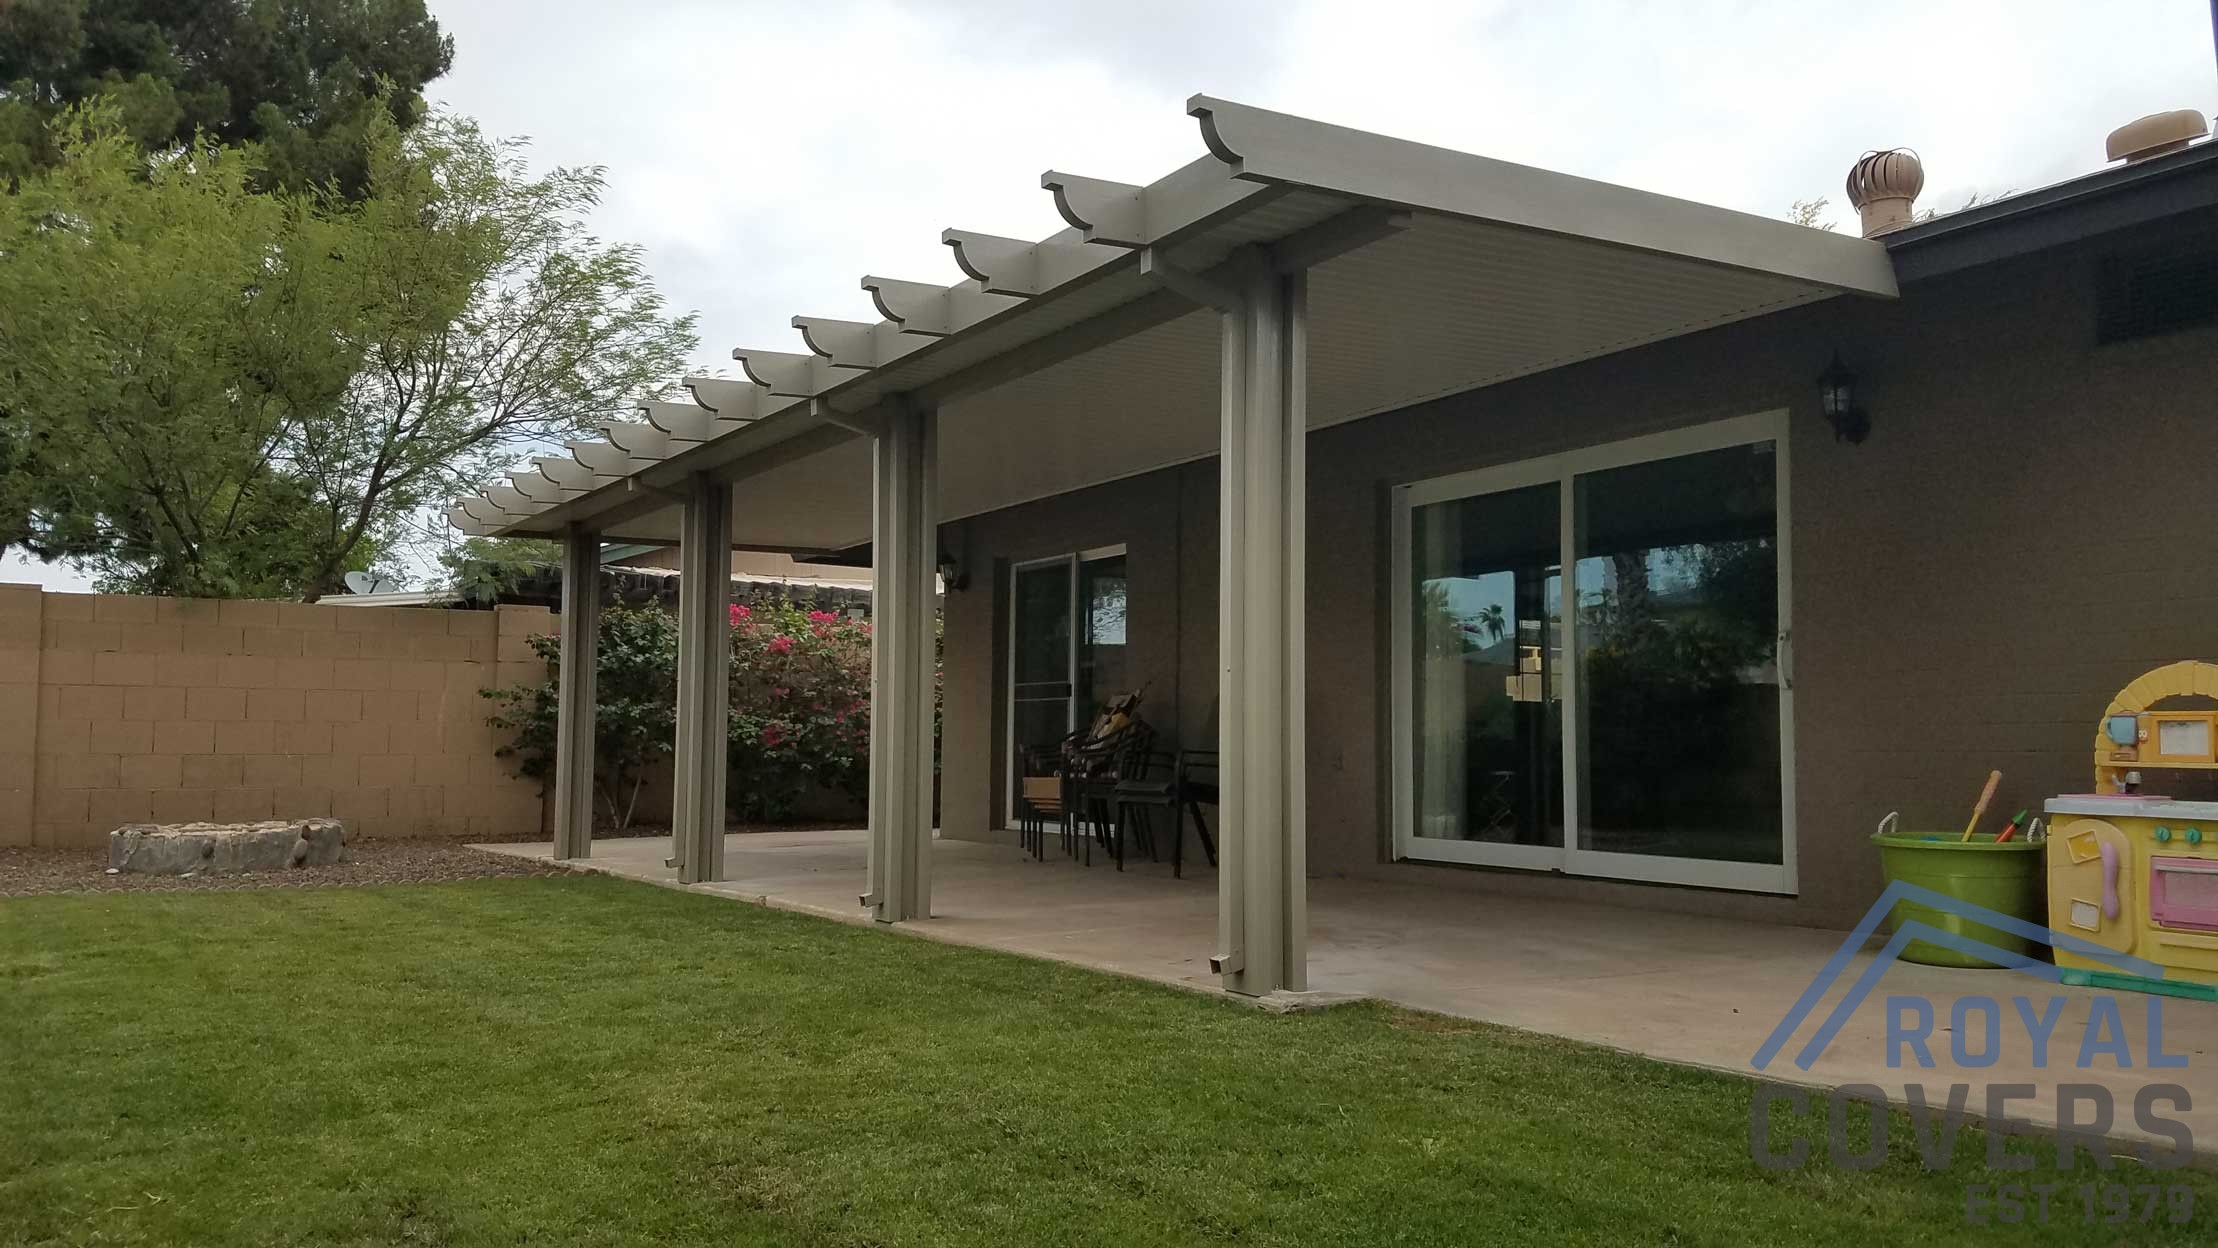 Next Aluminum Patio Covered Alumawood Solid Cover Installer within sizing 2218 X 1248